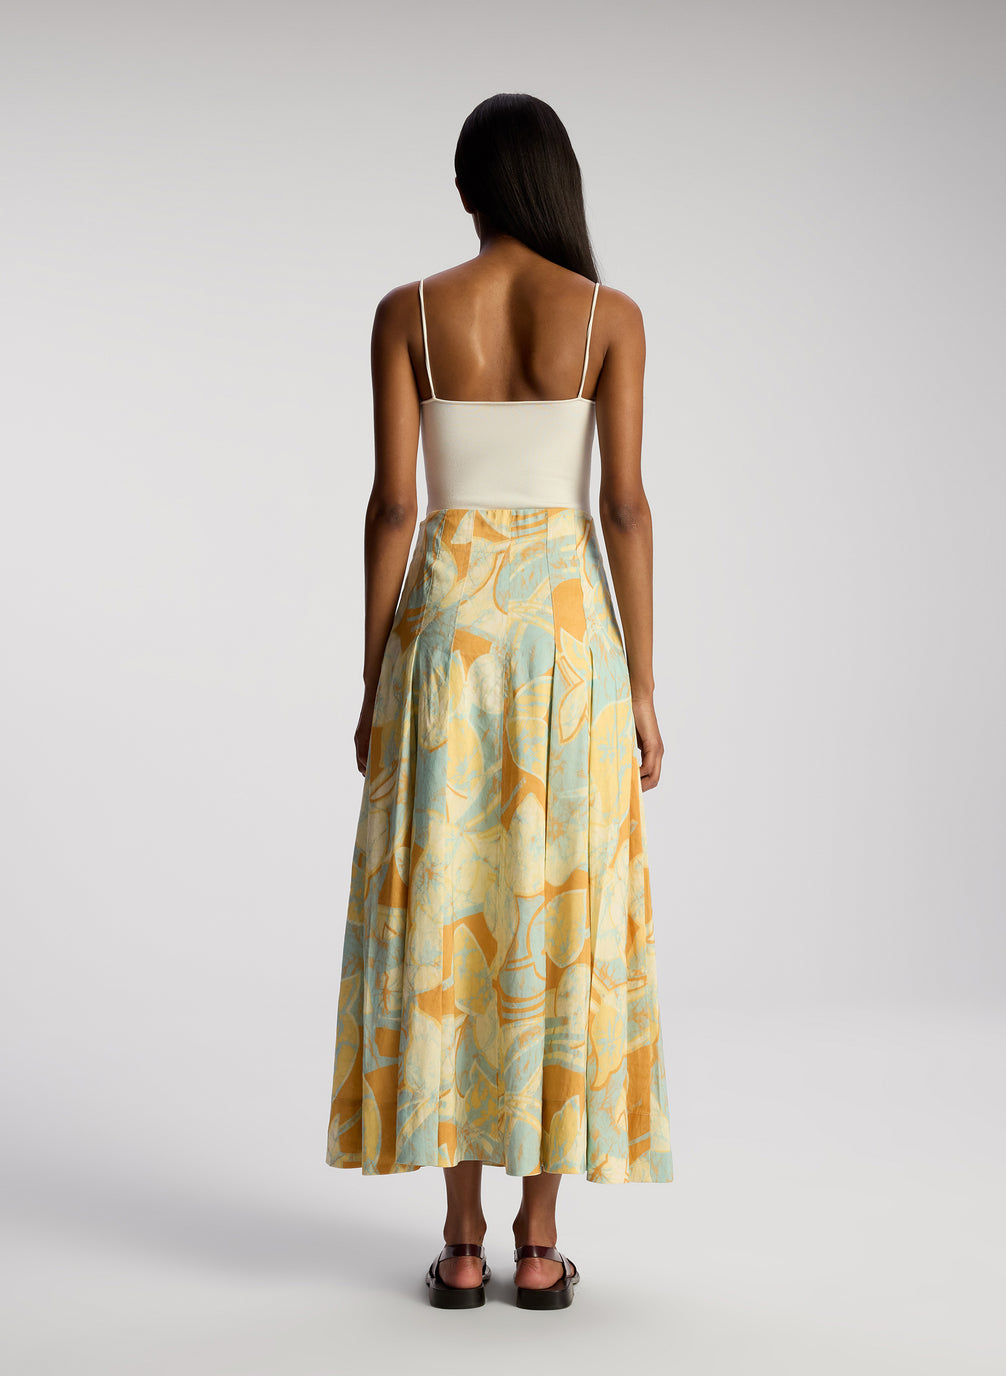 back view of woman wearing whit bodysuit and multicolor midi skirt